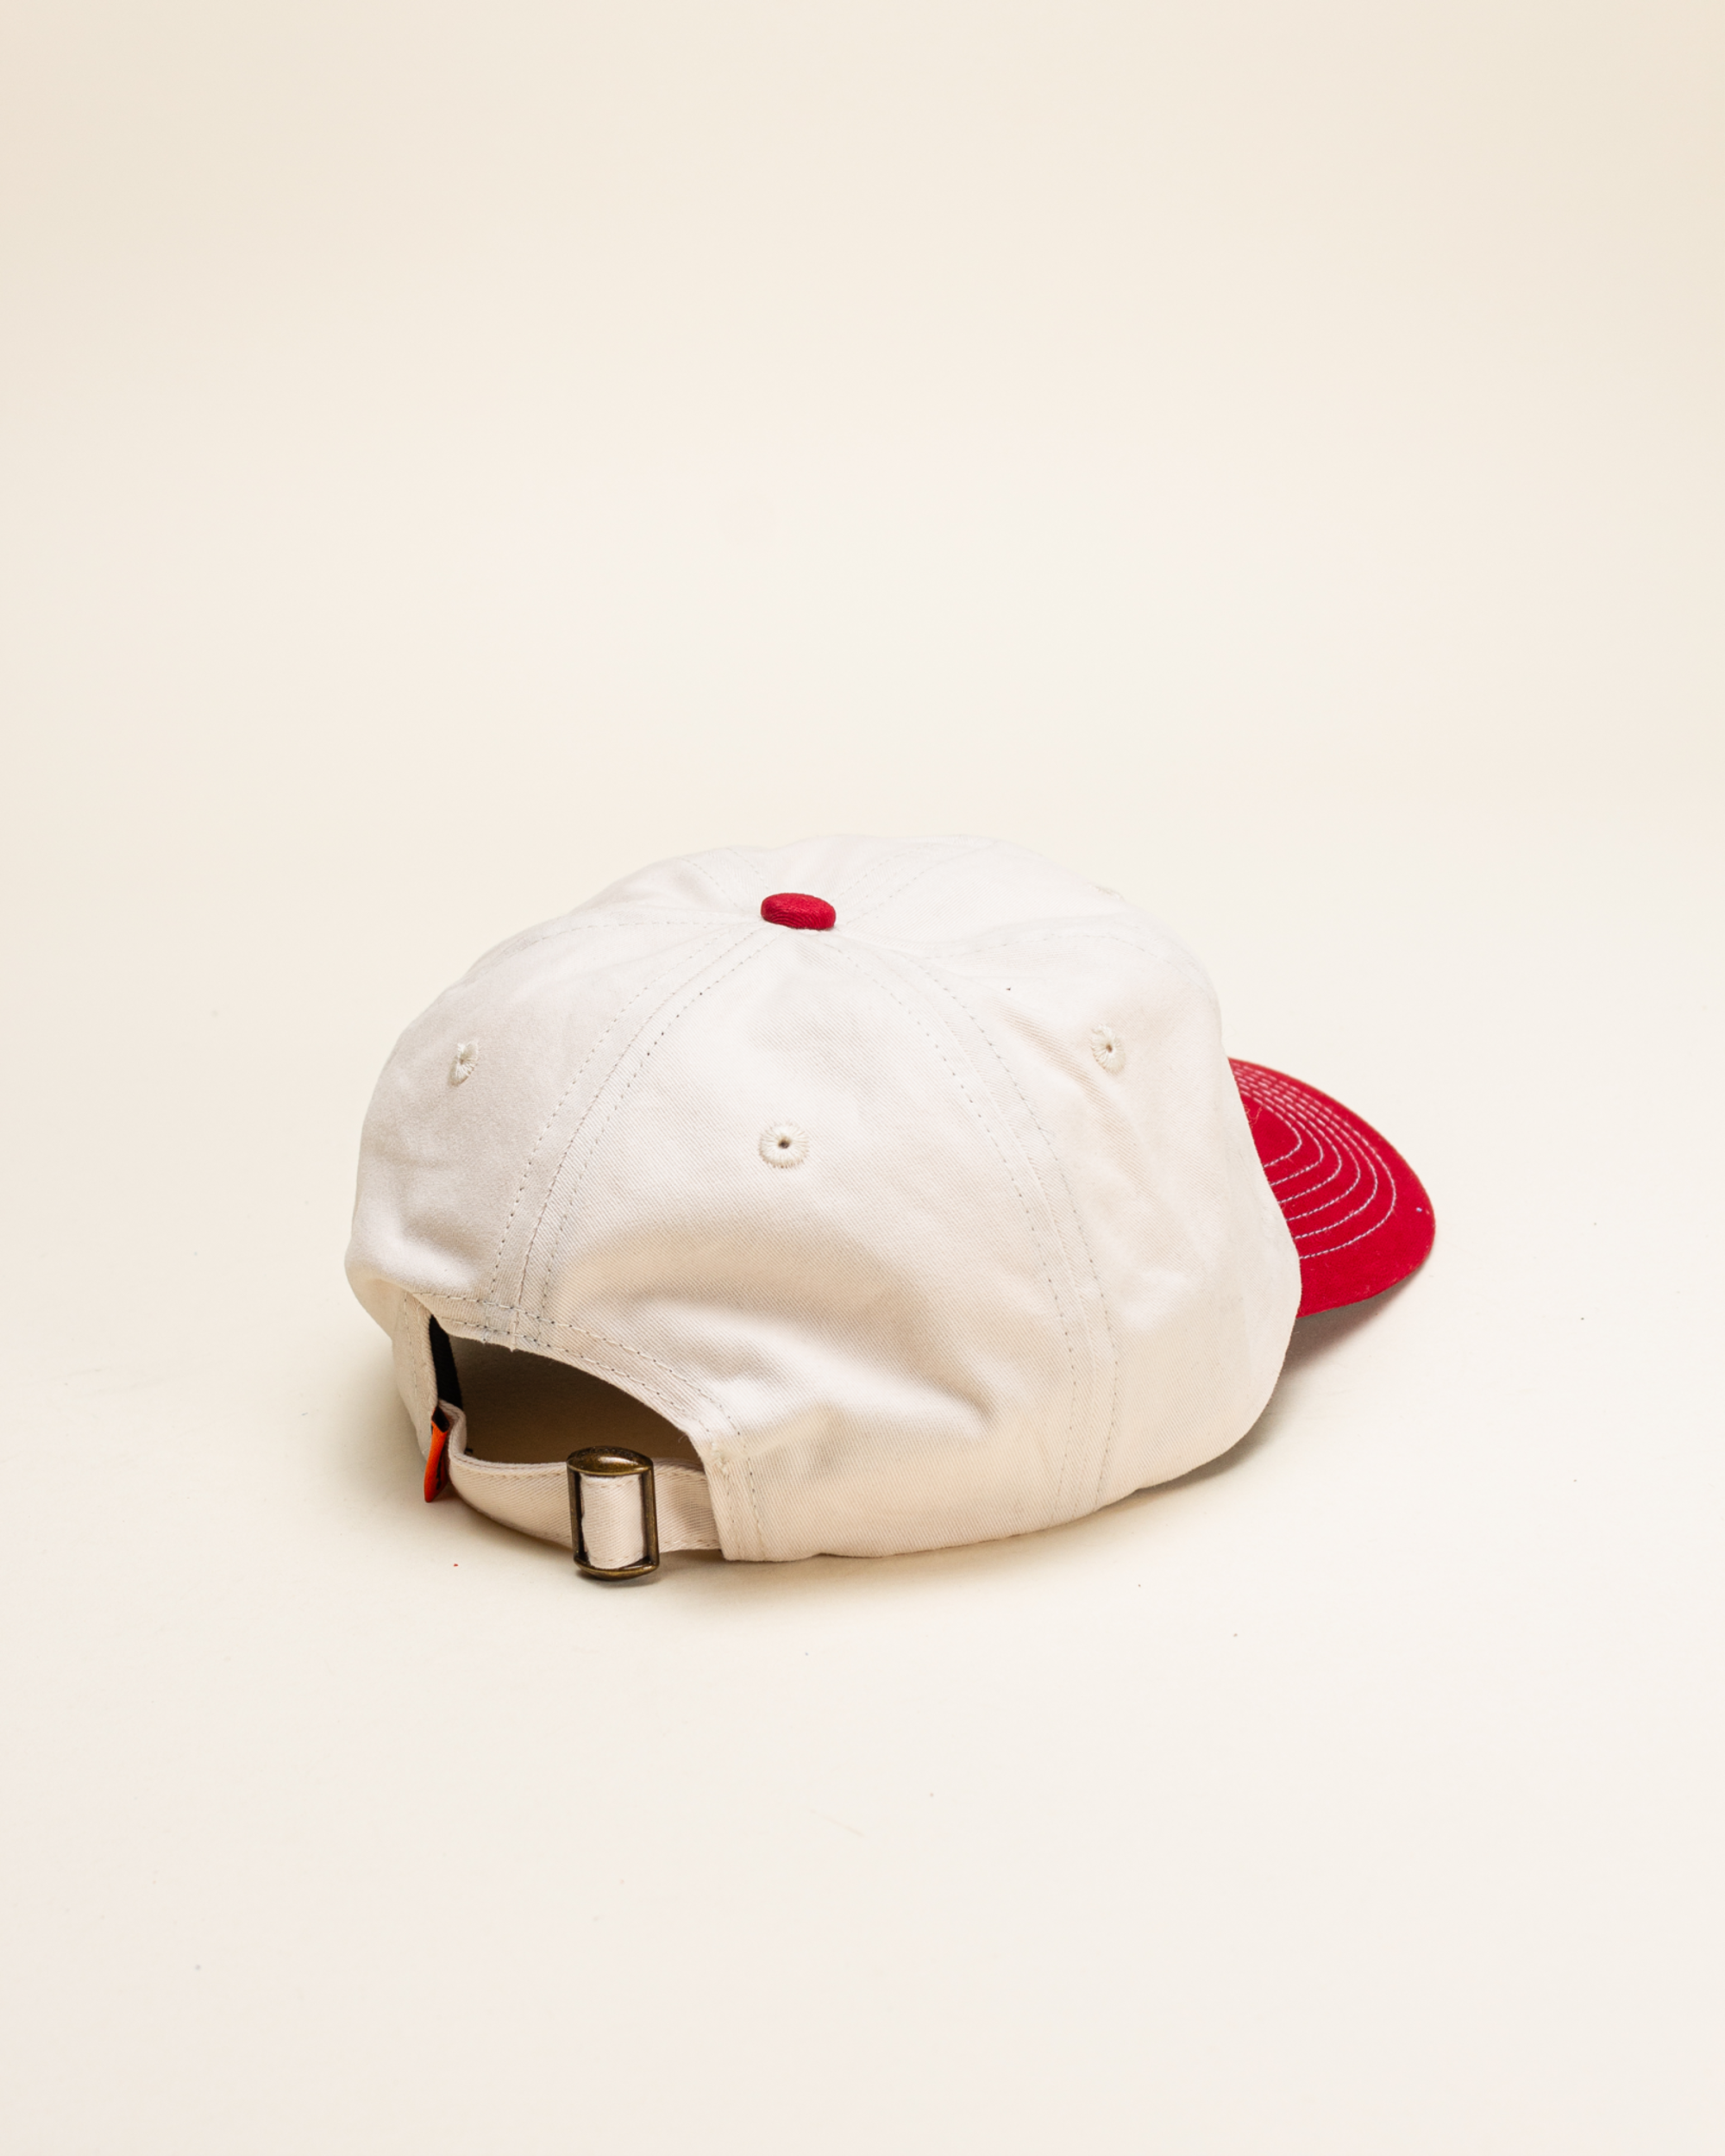 Butter Goods Rodent 6 Panel Cap - Natural/Burnt Red